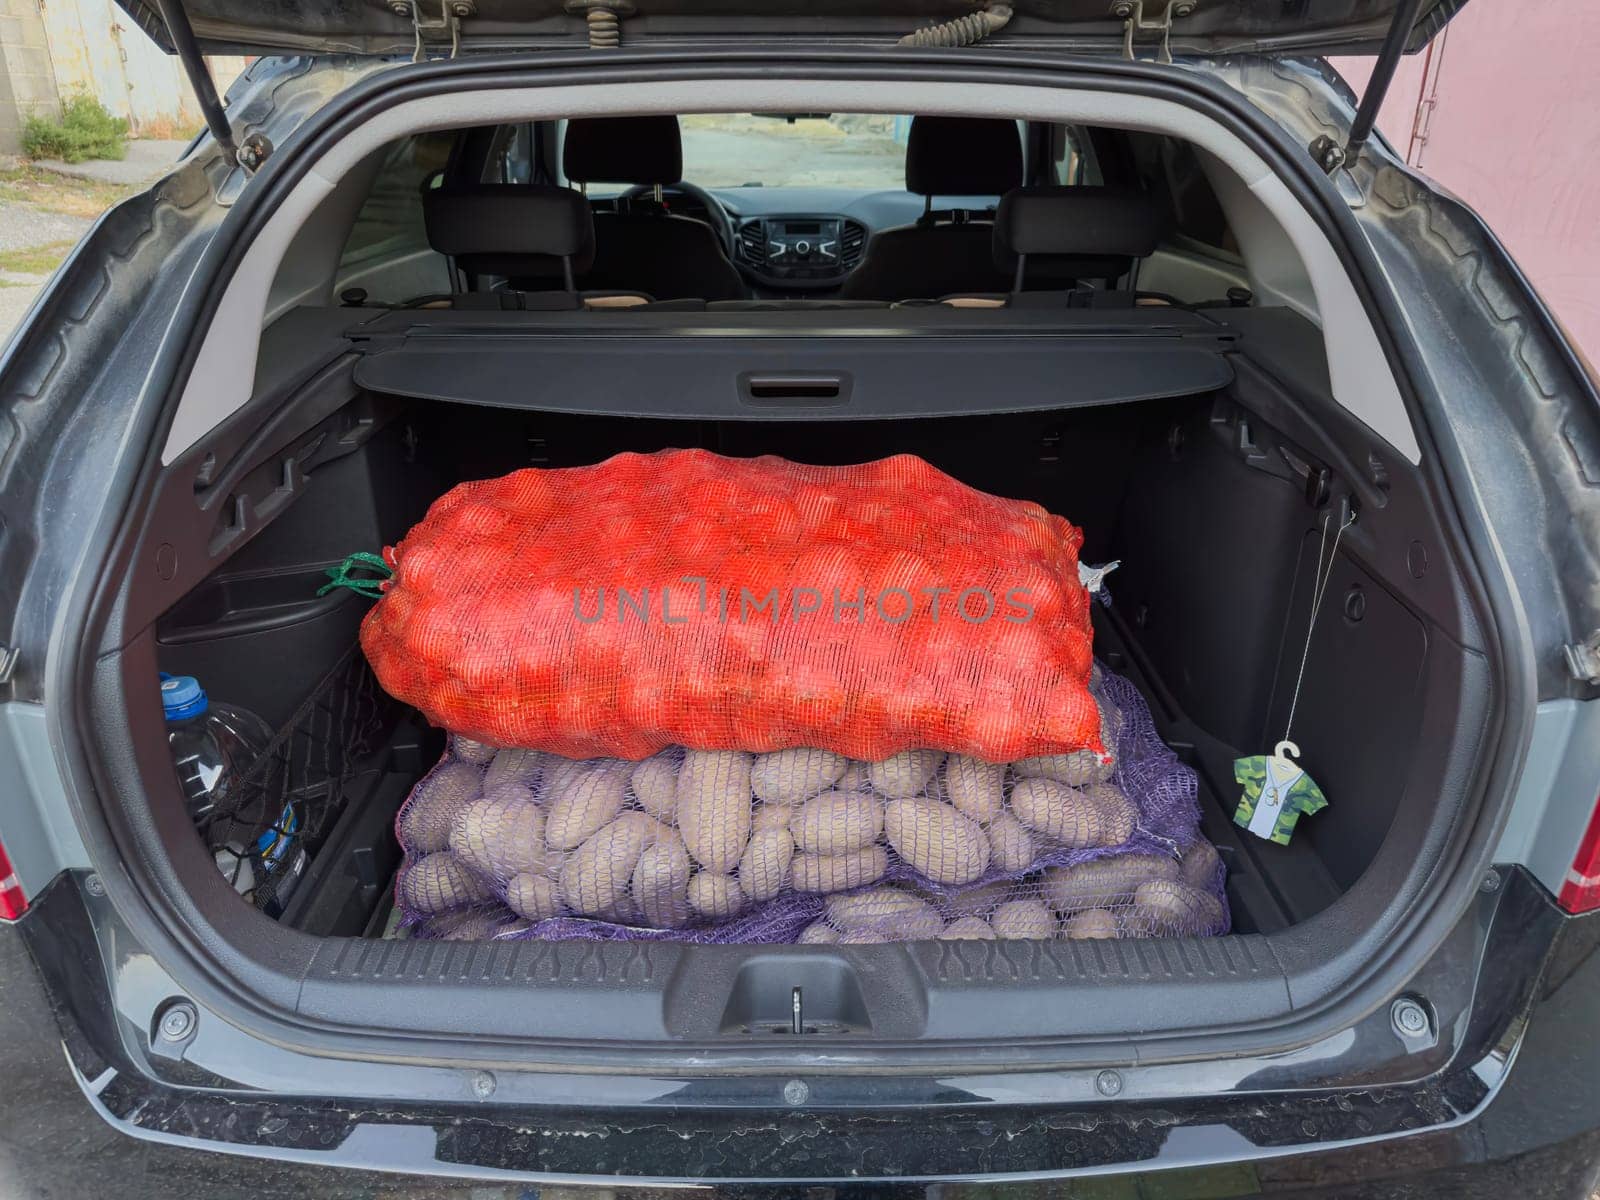 Bags of potatoes in the trunk of the car by roman112007